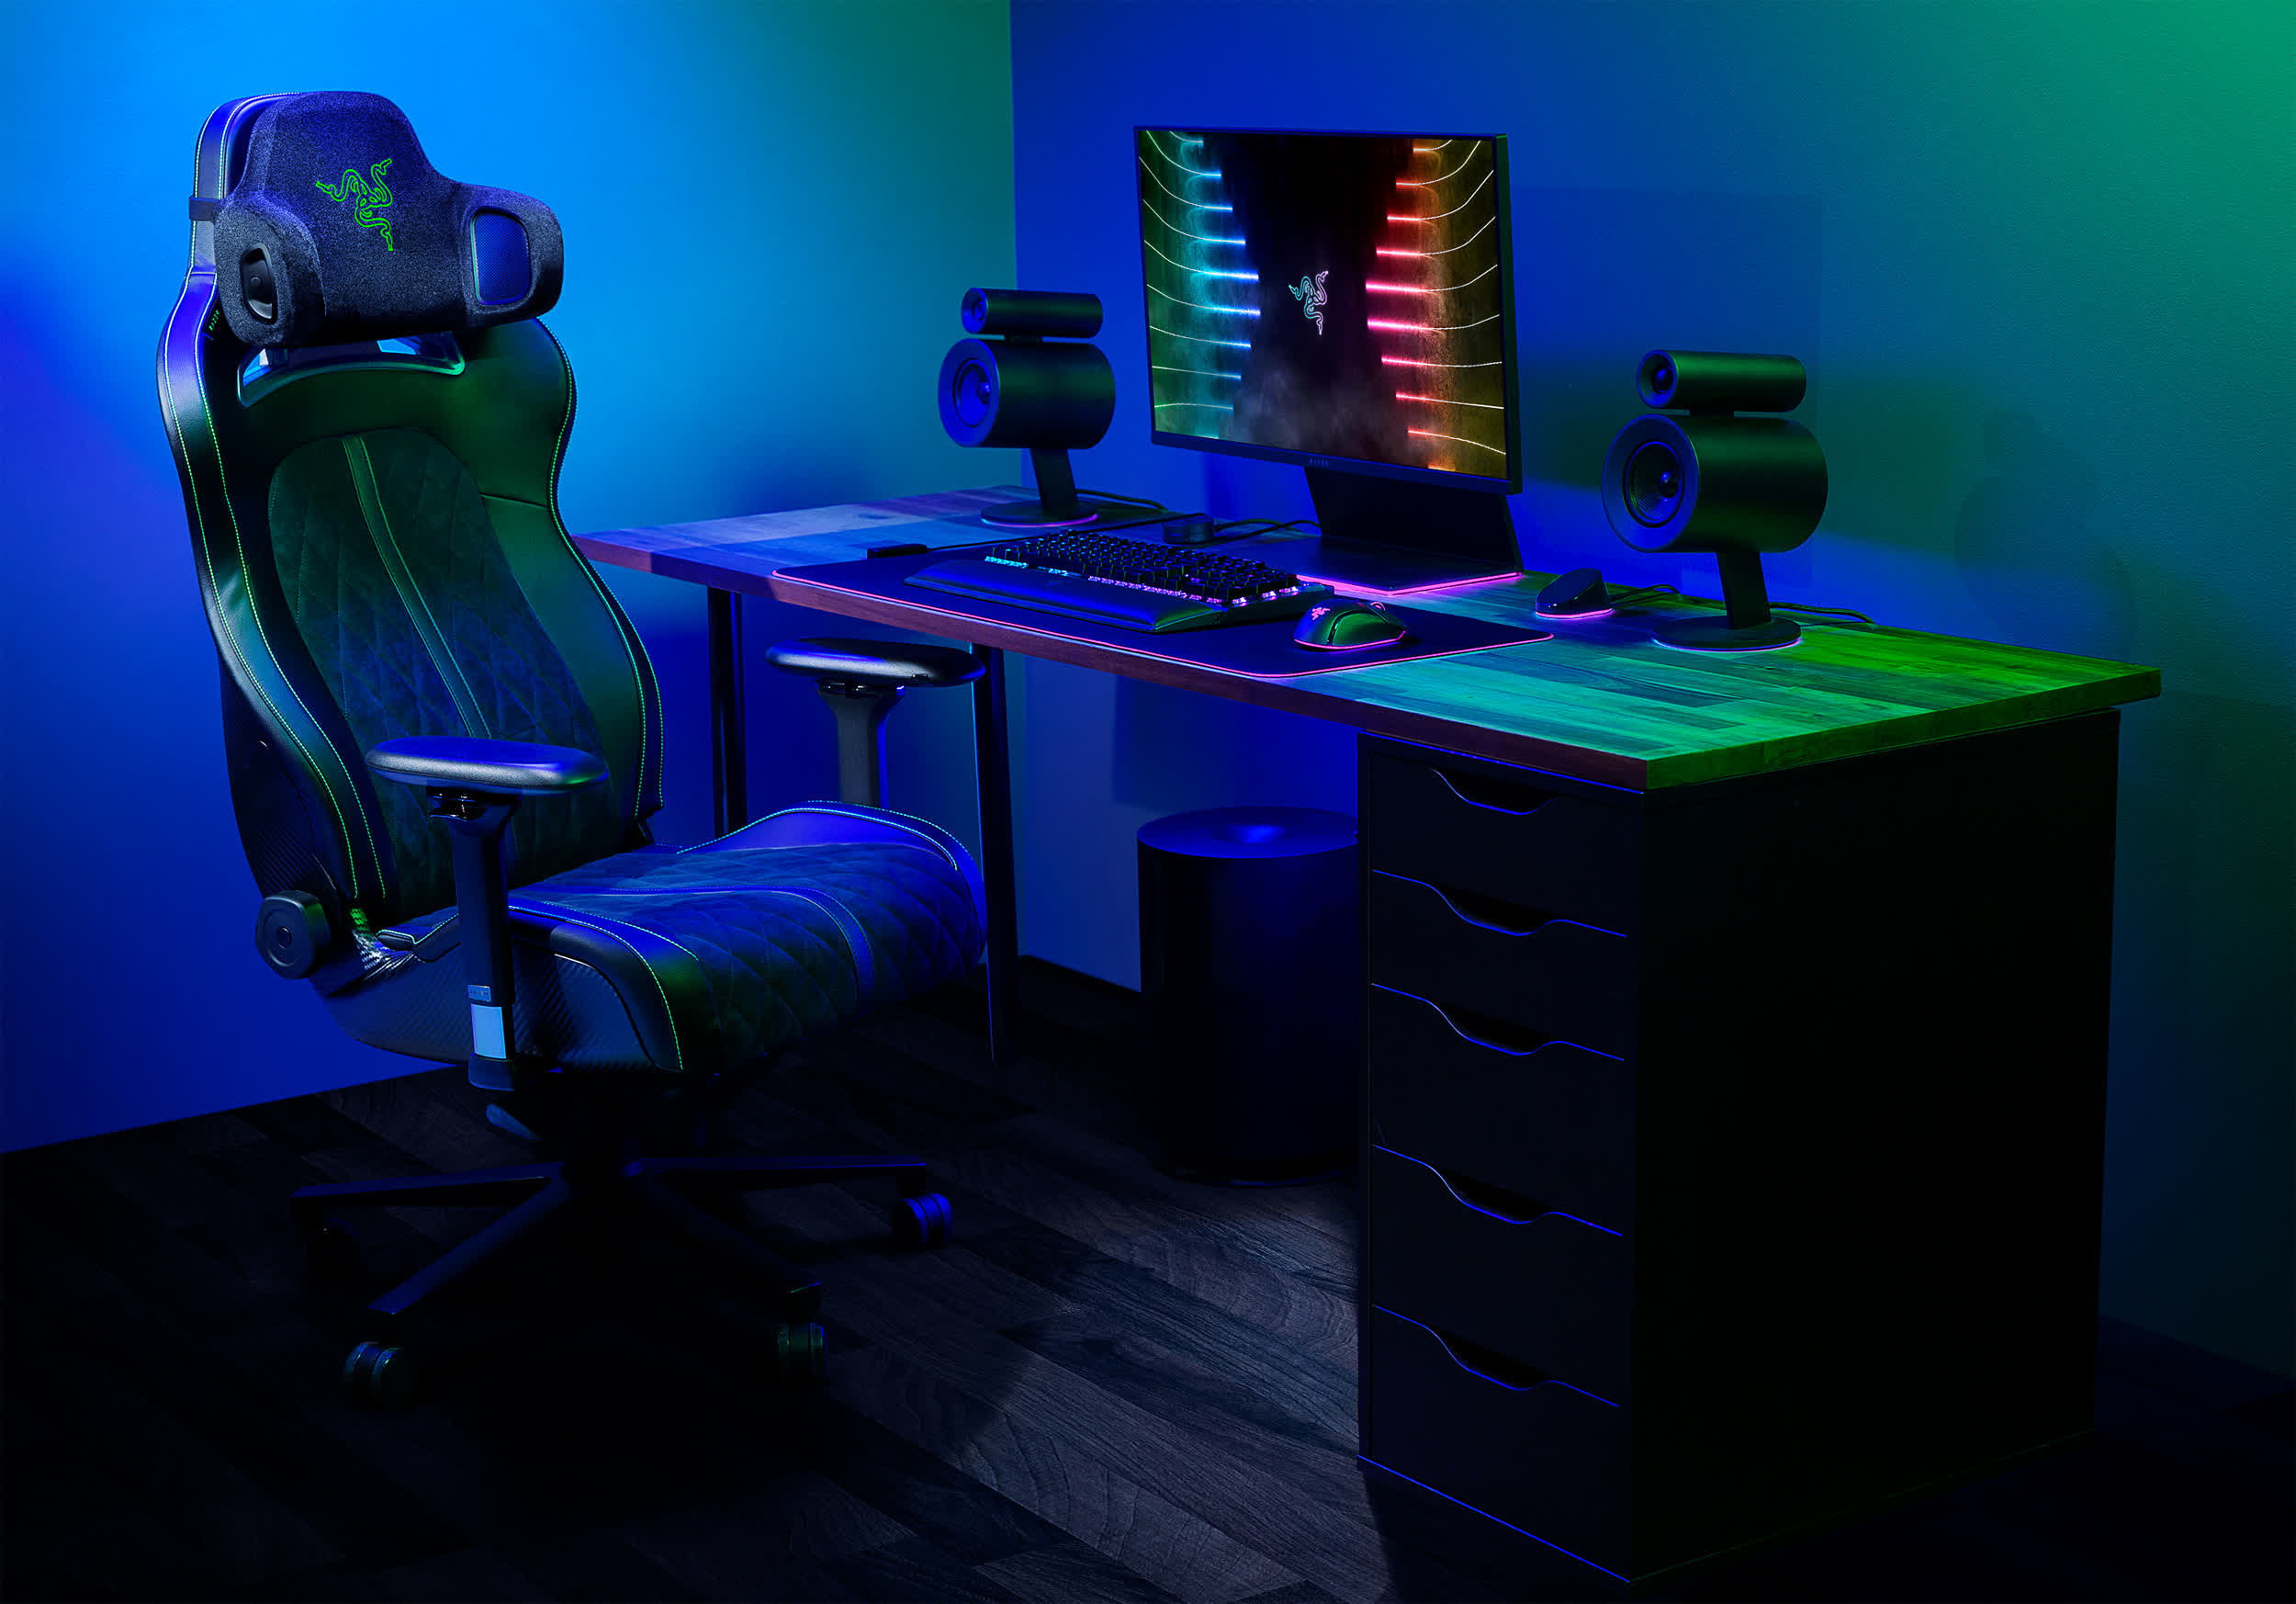 Razer's CES moonshot is a surround sound-enabled cushion for your gaming chair